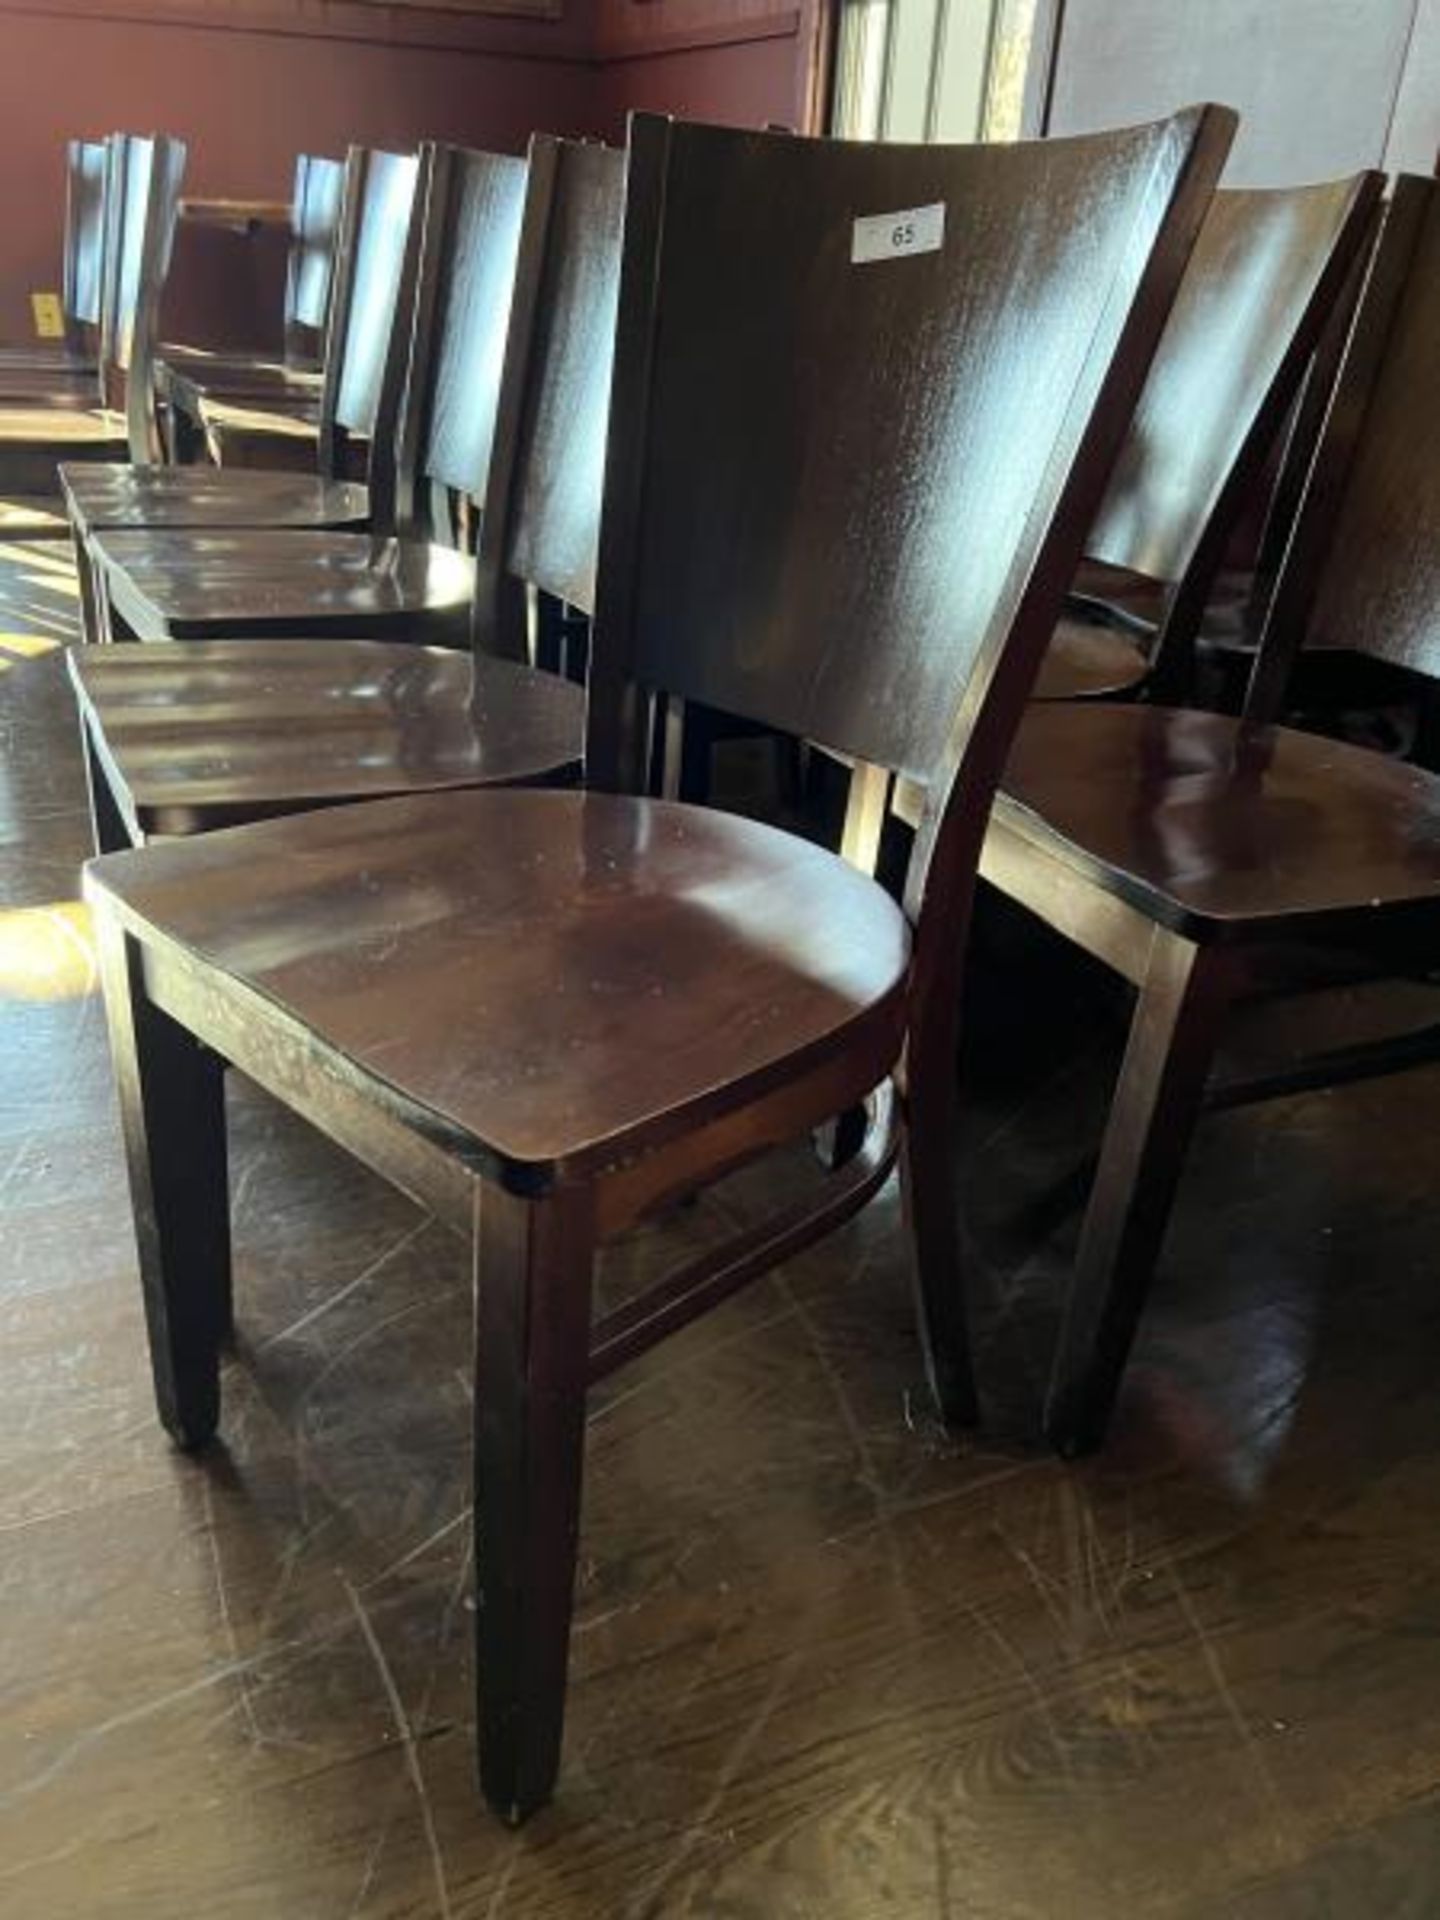 Lot of (23) Chairs in Tavern - Image 2 of 4